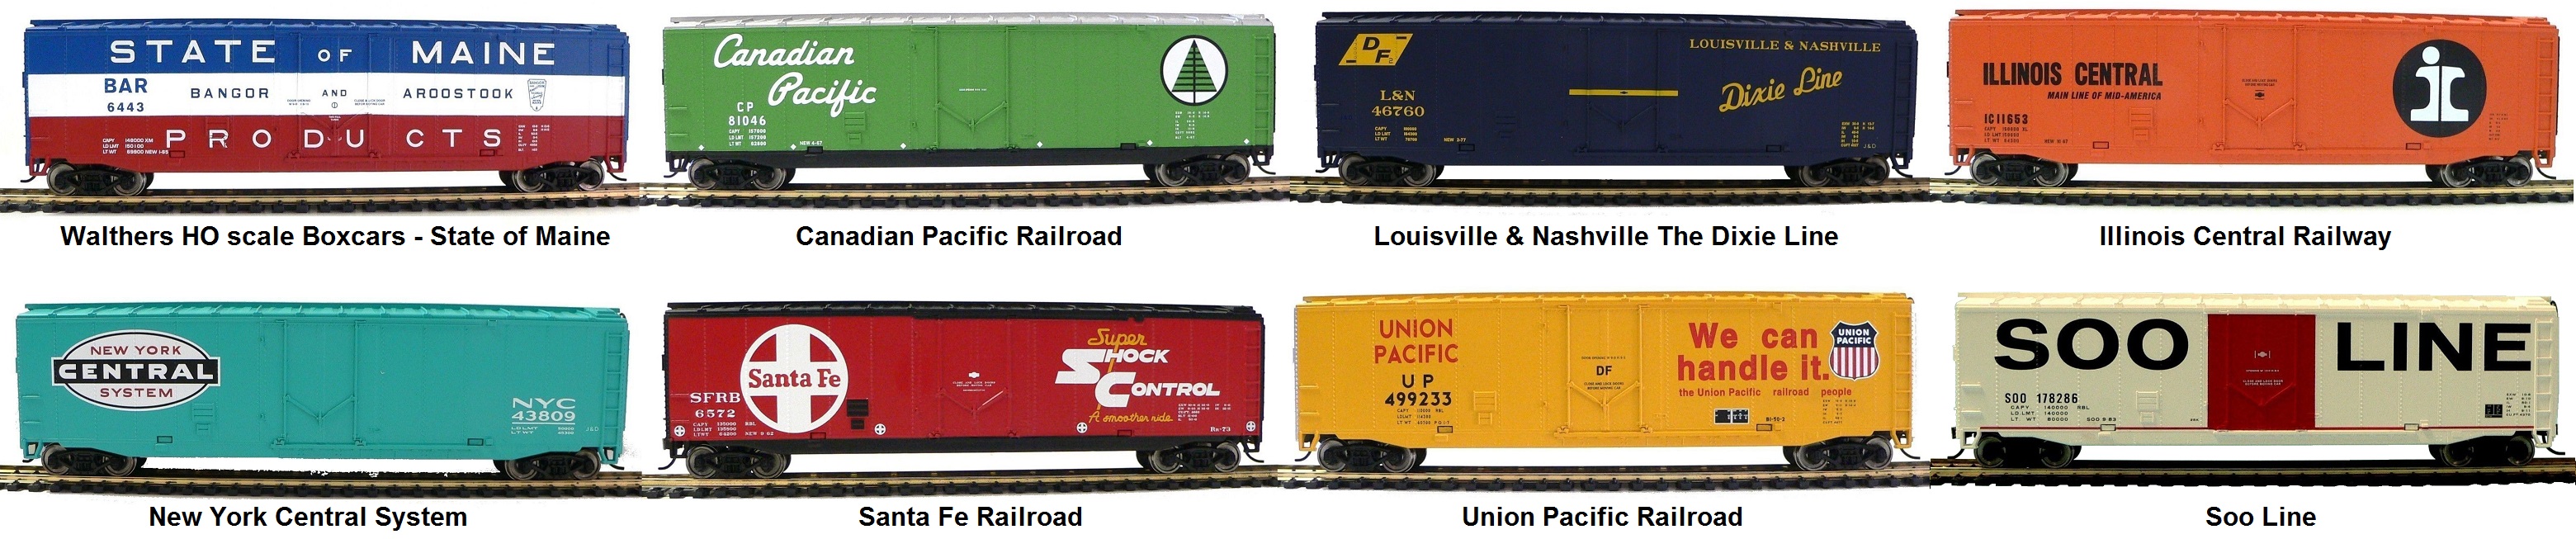 Walther's HO scale boxcars